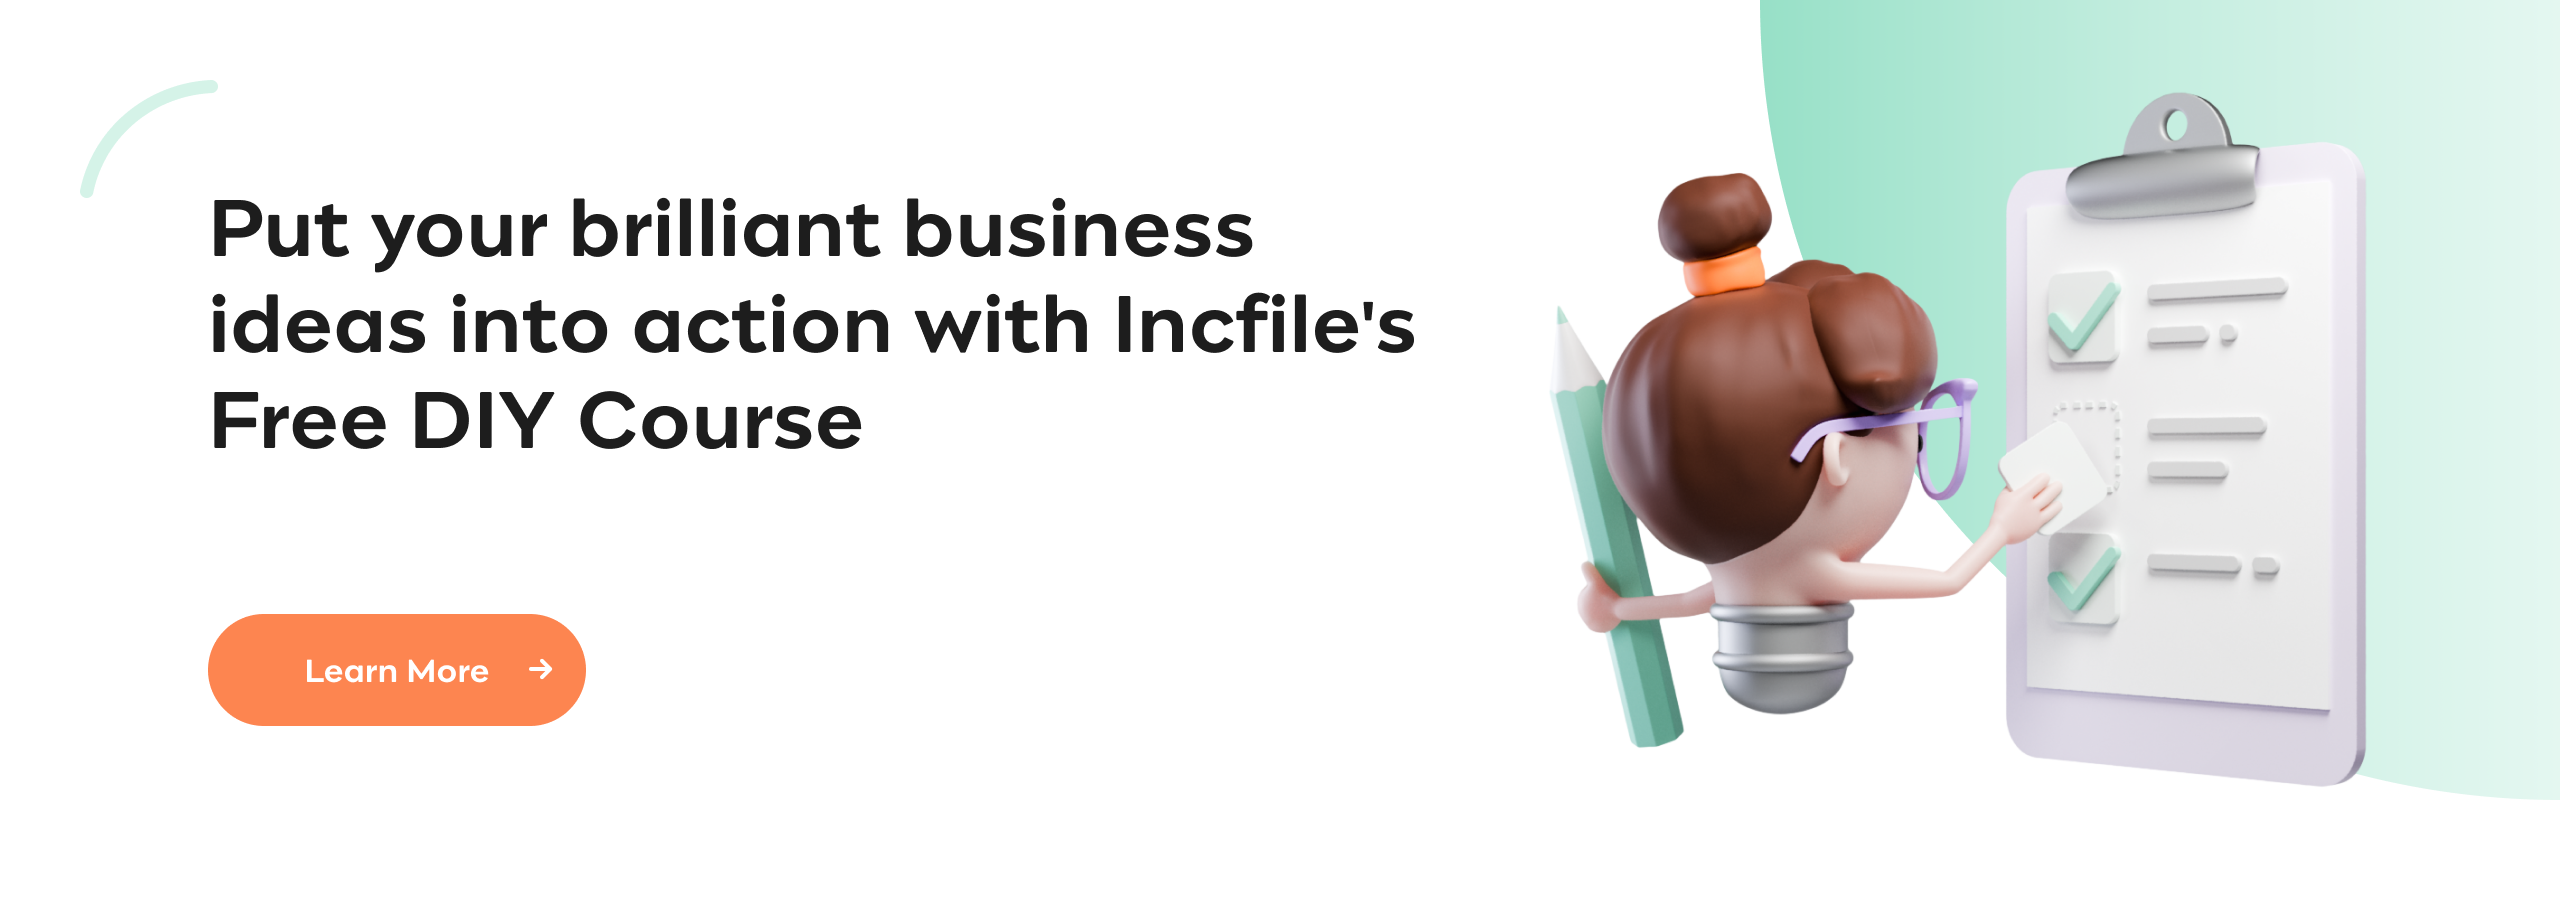 Put your brilliant business ideas into action with Incfile's Free DIY Course